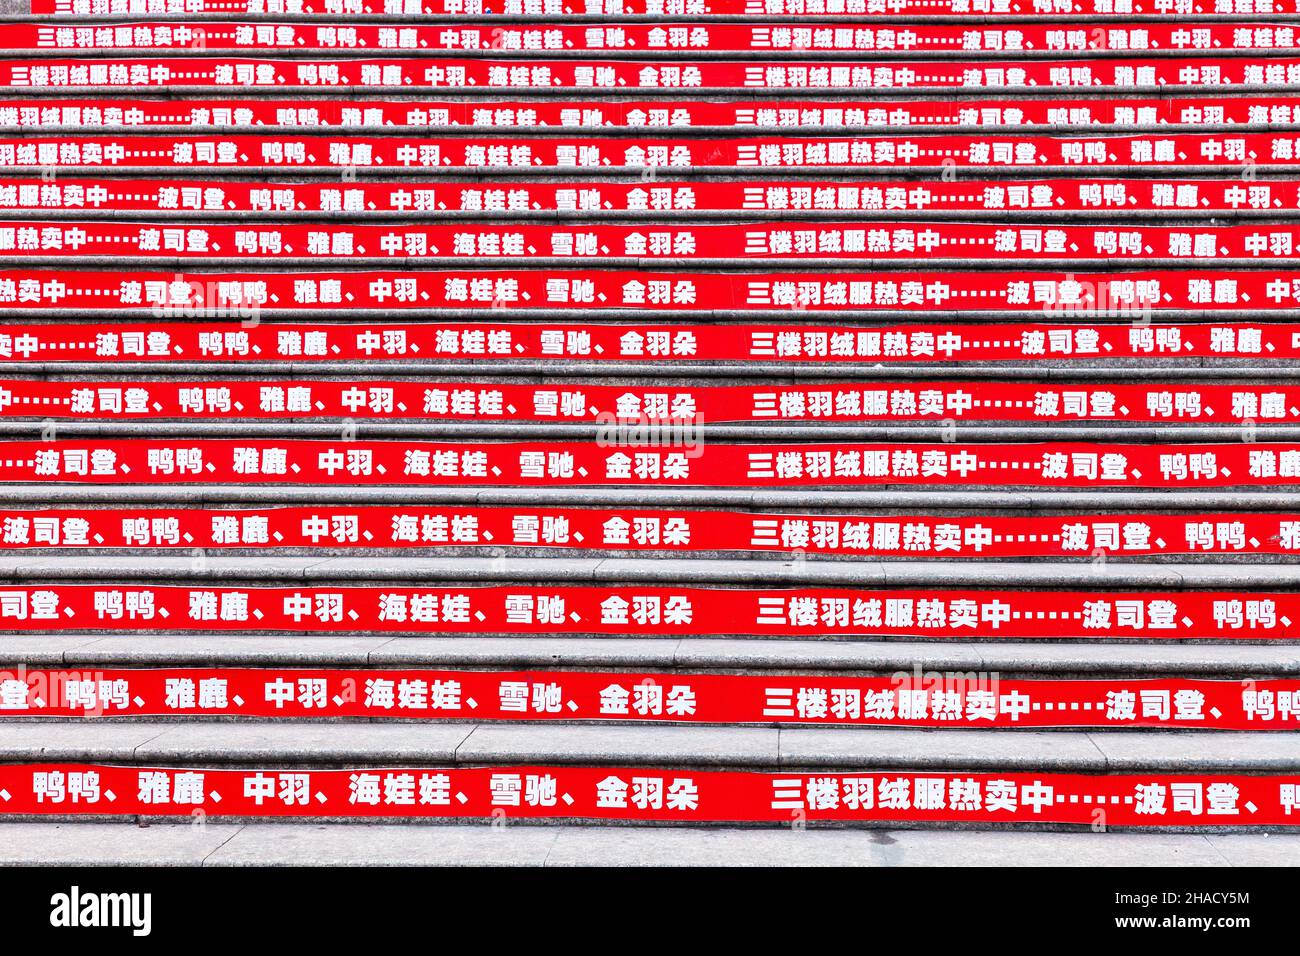 Wide staircase whose risers bear a red advertising banner. Jiashan, China Stock Photo